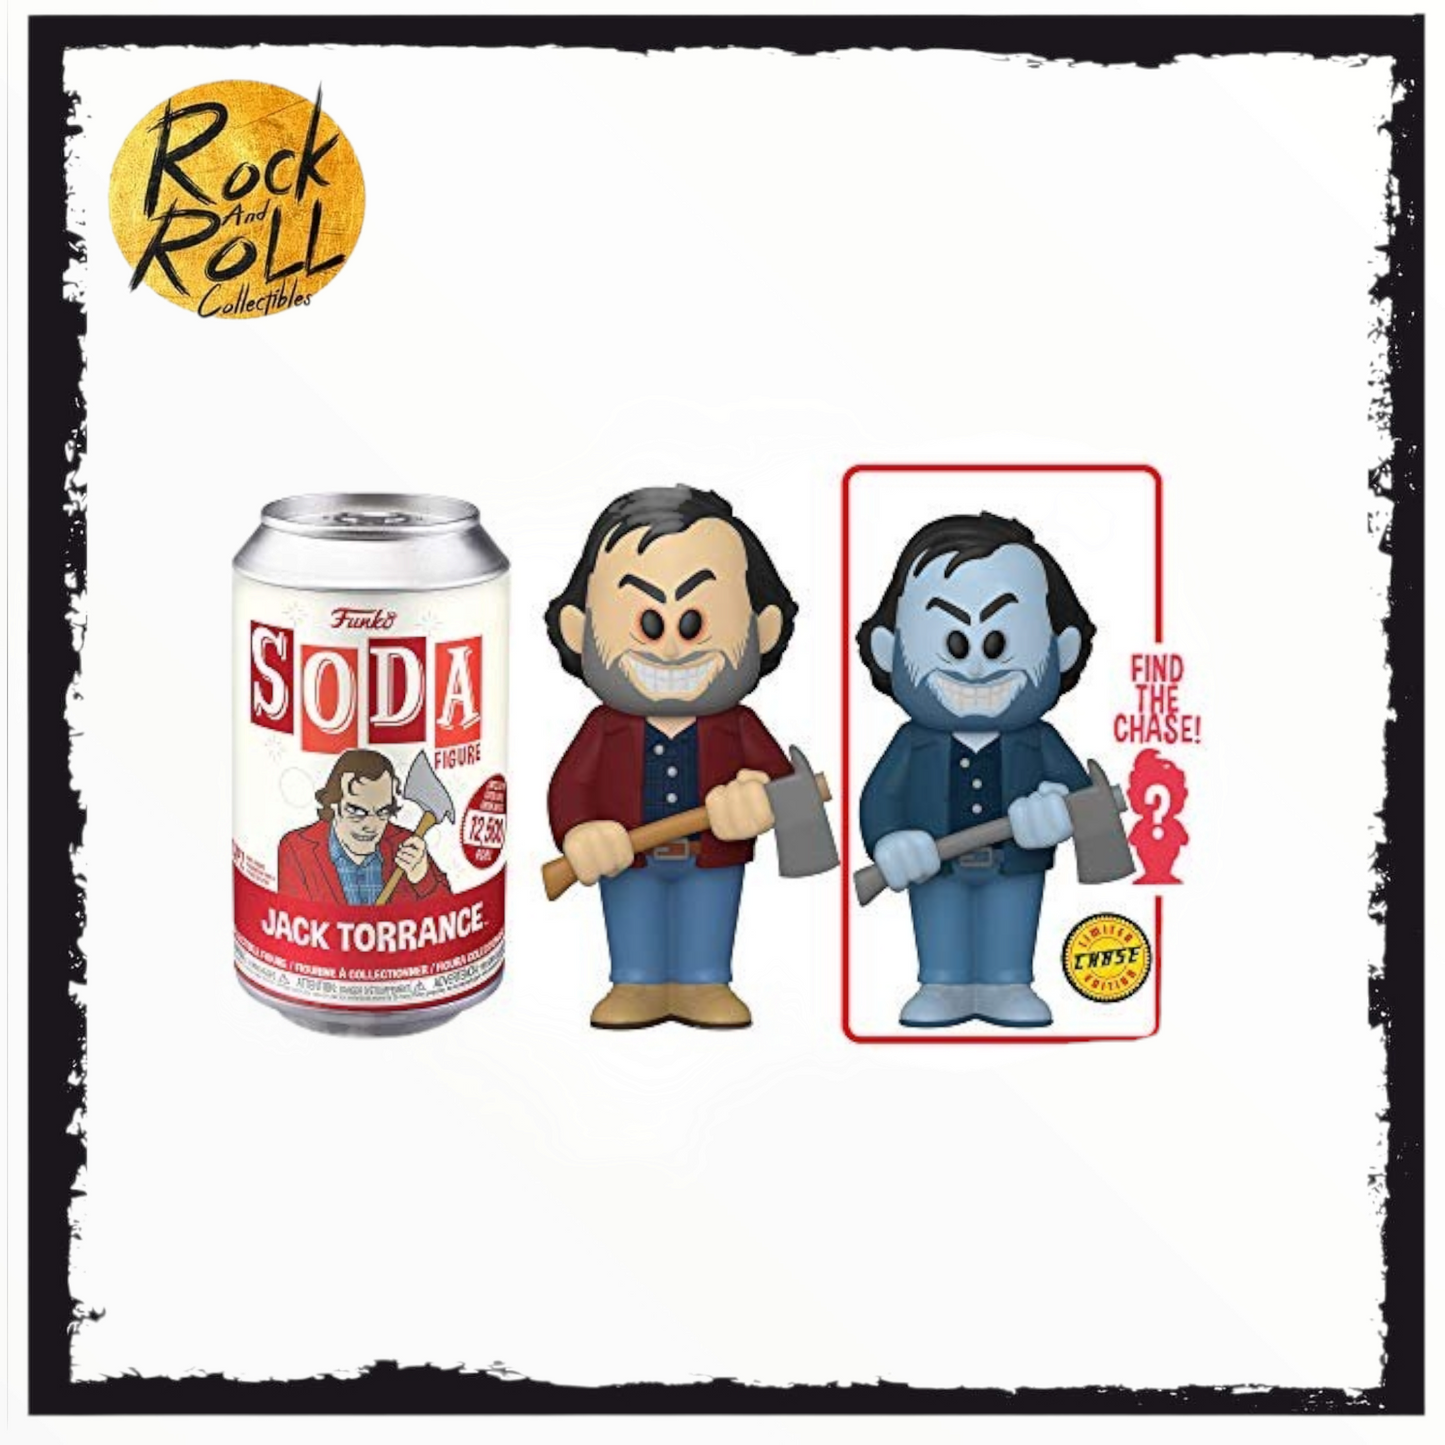 Funko Vinyl Soda - The Shining - Jack Torrance 12,500pieces Chance Of Chase